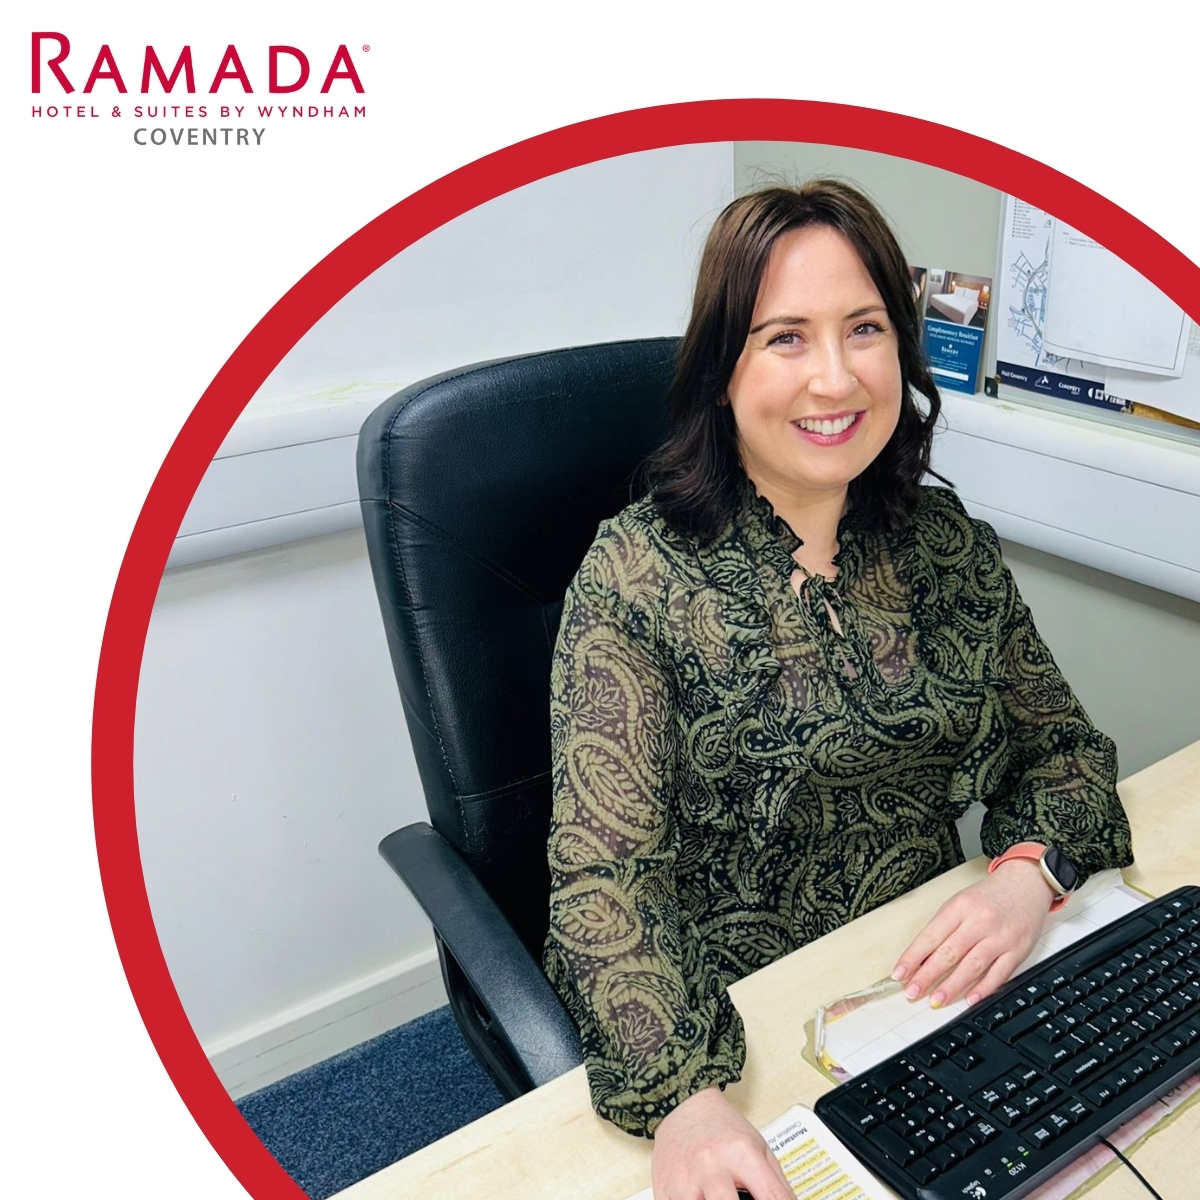 It's #MeetTheTeam Monday - today we're introducing Laura our Senior Sales & Marketing Assistant, & she has been a part of #RamadaCoventry for 2 years. In her spare time, Laura enjoys attending gigs, keeping fit, bottomless ‘brunching with the girls & spending time with family.